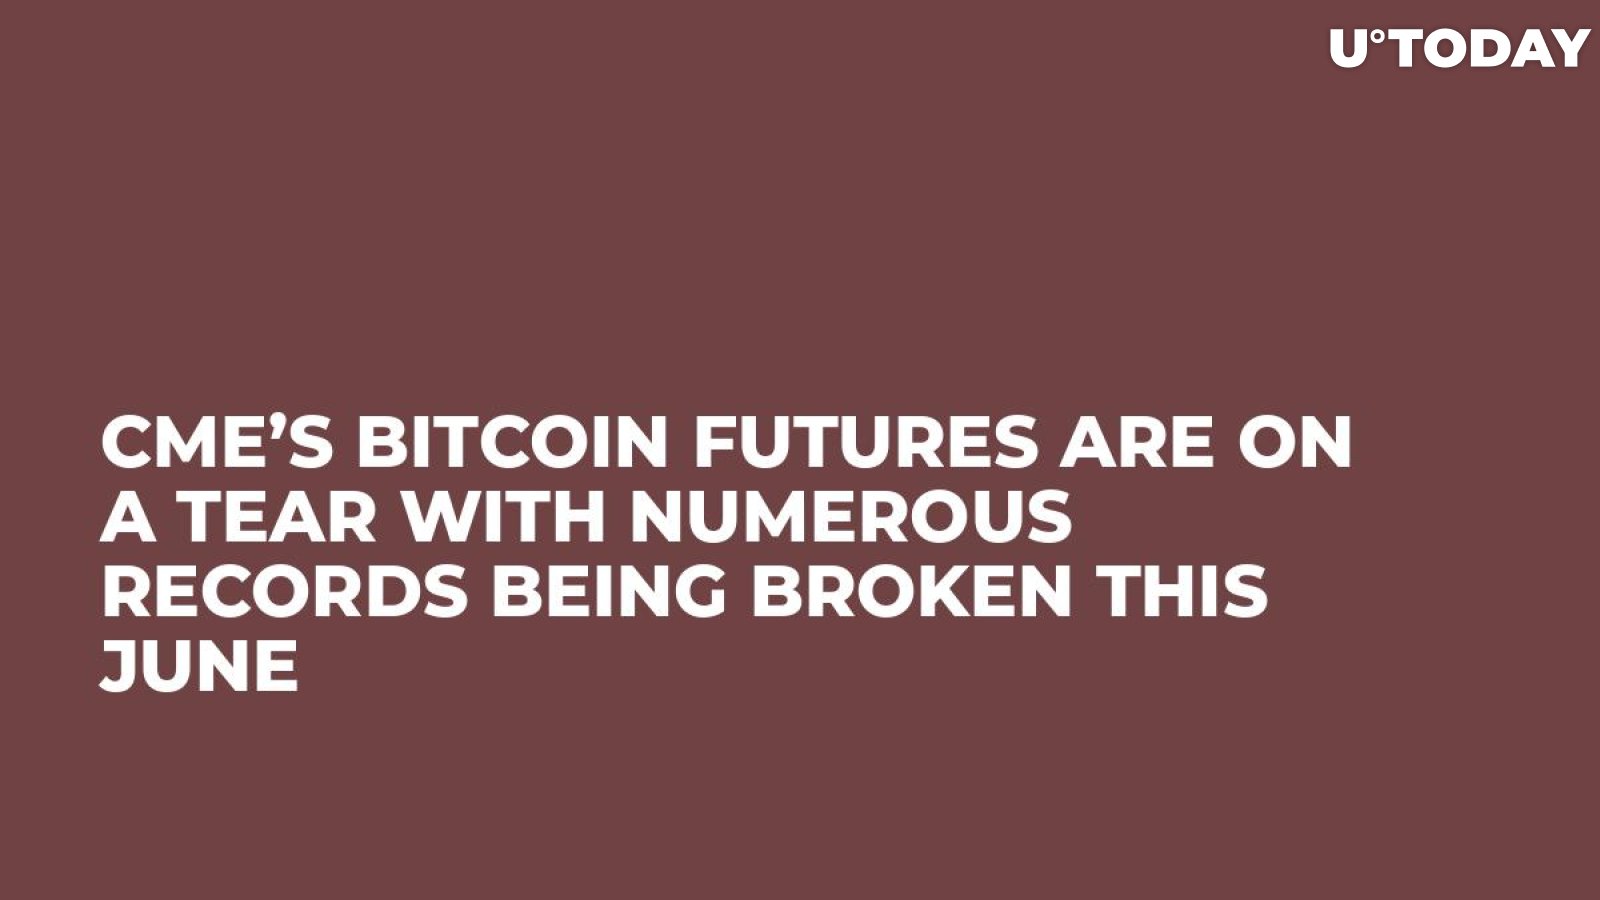 CME’s Bitcoin Futures Are on a Tear with Numerous Records Being Broken This June